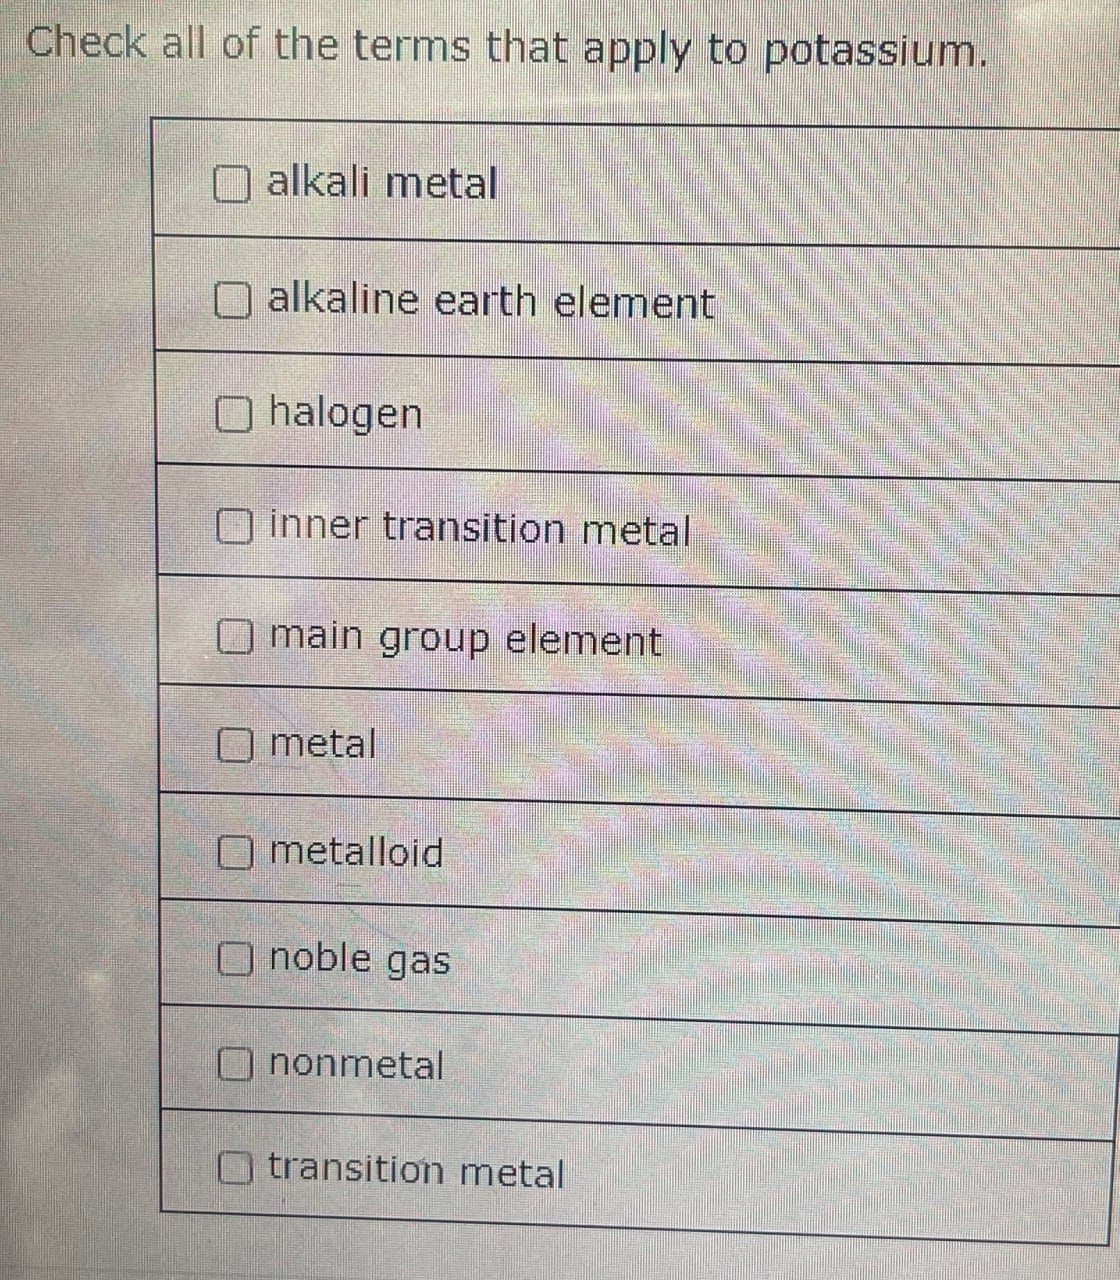 Check all of the terms that apply to potassium.
alkali metal
alkaline earth element
Ohalogen
inner transition metal
main group element
metal
Ometalloid
noble gas
nonmetal
transition metal